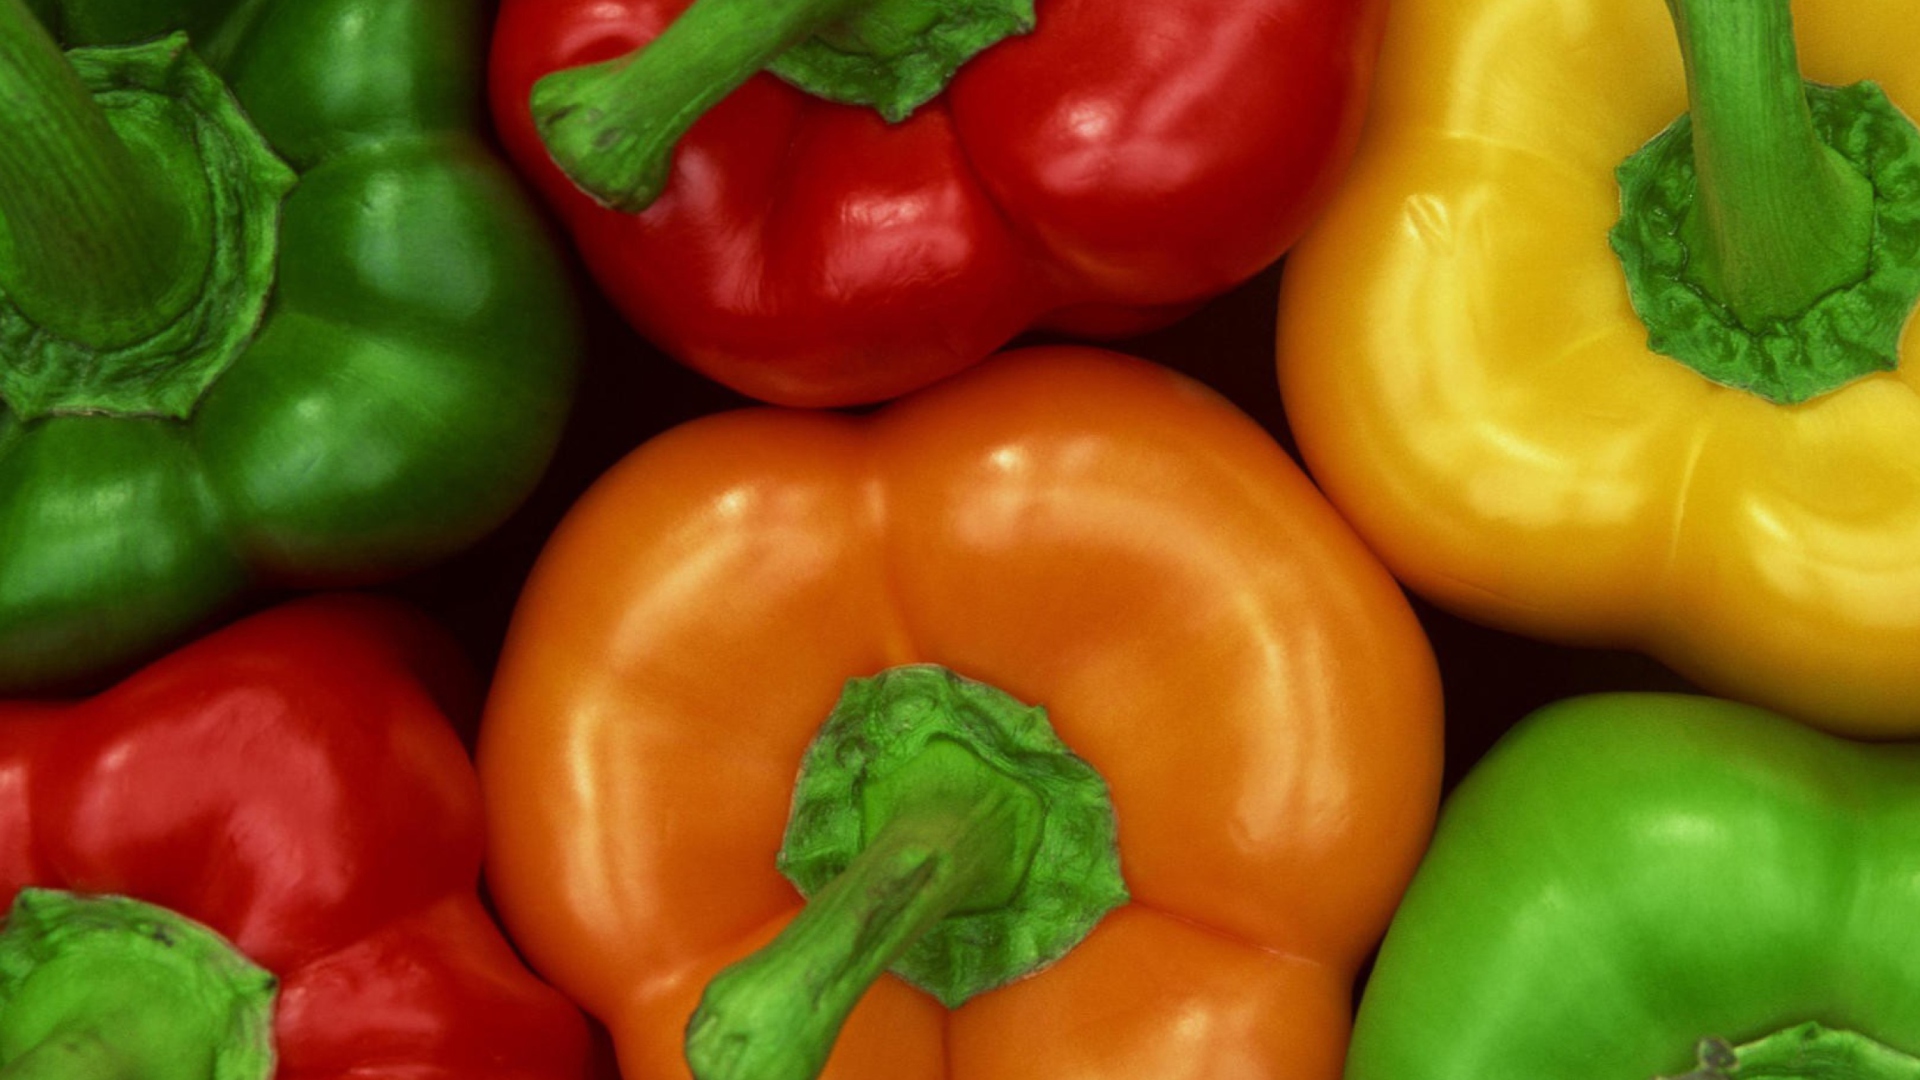 Colored Peppers wallpaper 1920x1080